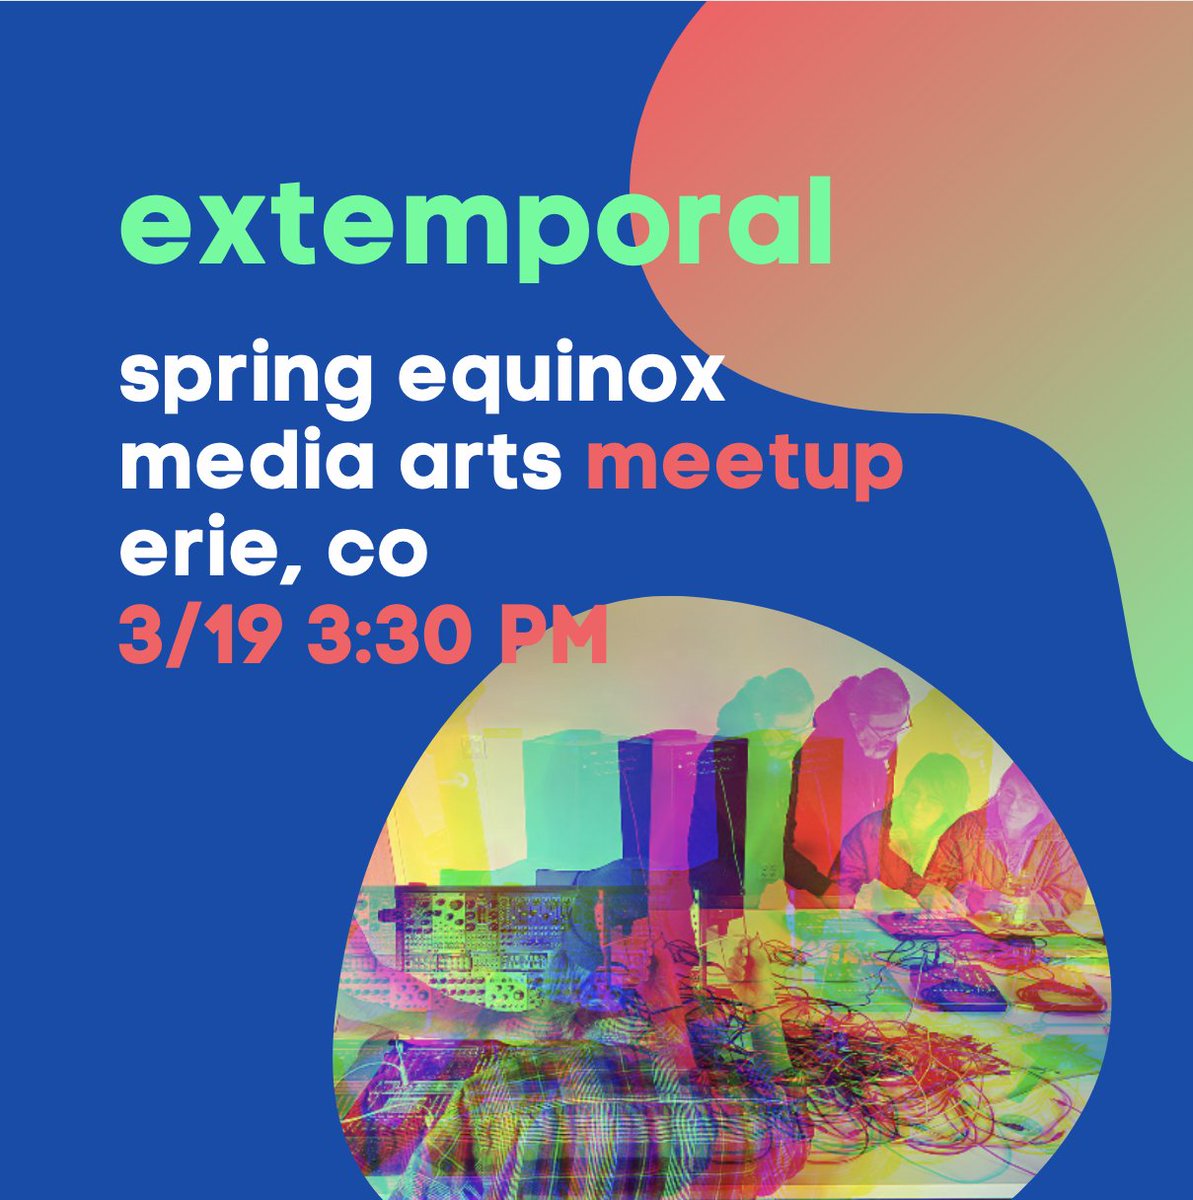 Next meetup is on Mar 19 in Erie/Lafayette. Join us as we celebrate the Spring Equinox with gadgets, instruments, art, and DIY projects. extemporal.net

#boulderart #lafayettecolorado #eriecolorado #denverartists #denverdiy #modularsynth #mediaart #videosynthesis #vjing